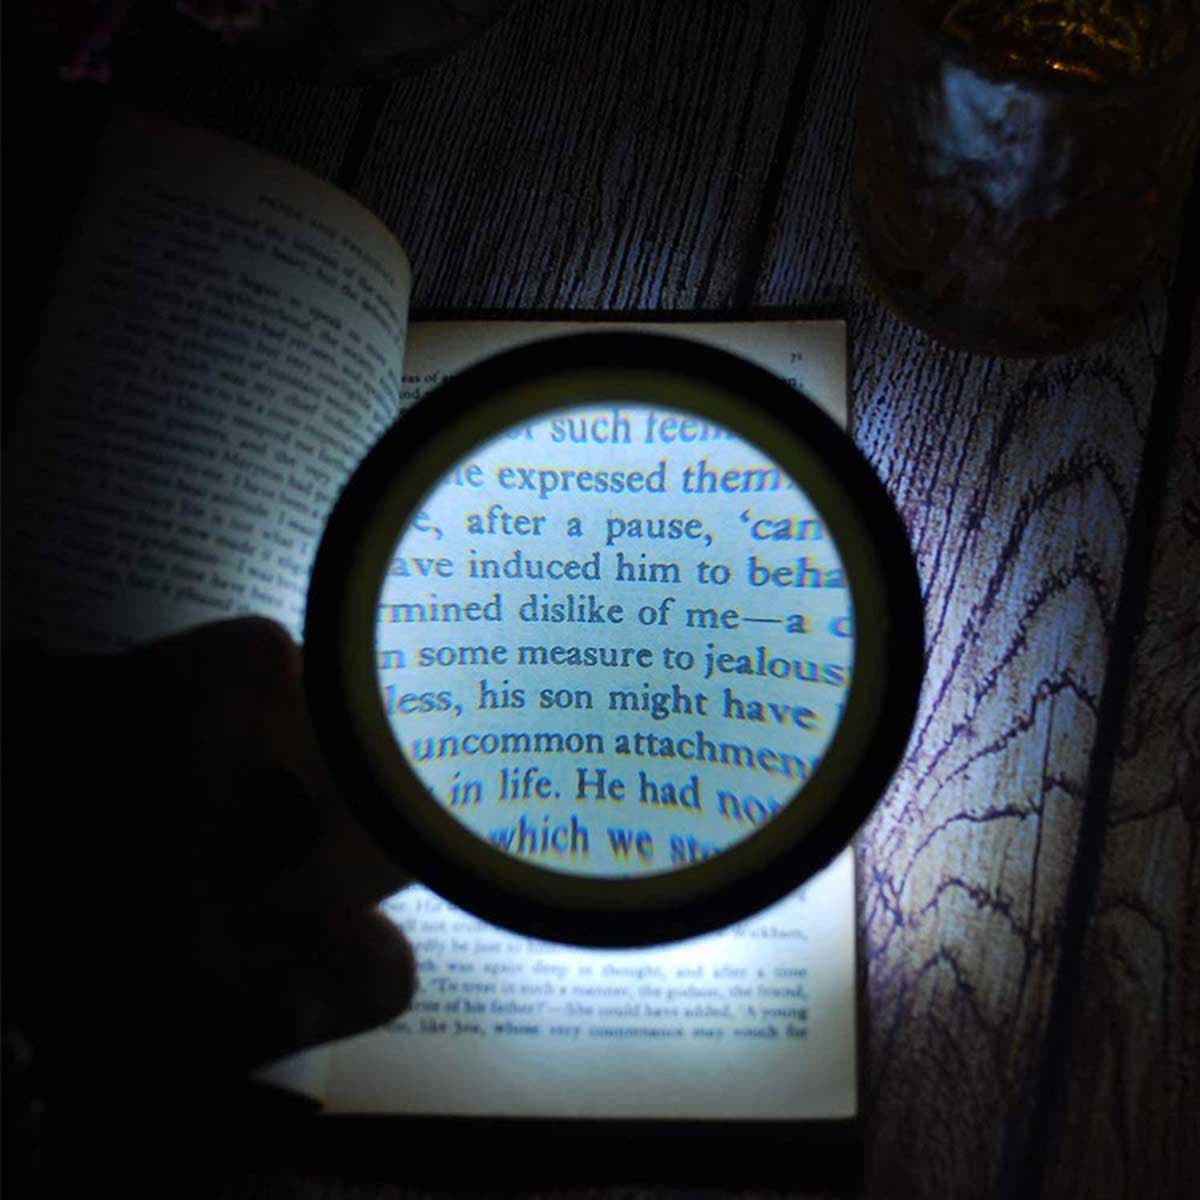 Magnifying Glasses, Desktop Magnifying Glass Led Lamp Reading Book Magazine  Repair Beauty High Magnification Magnifier